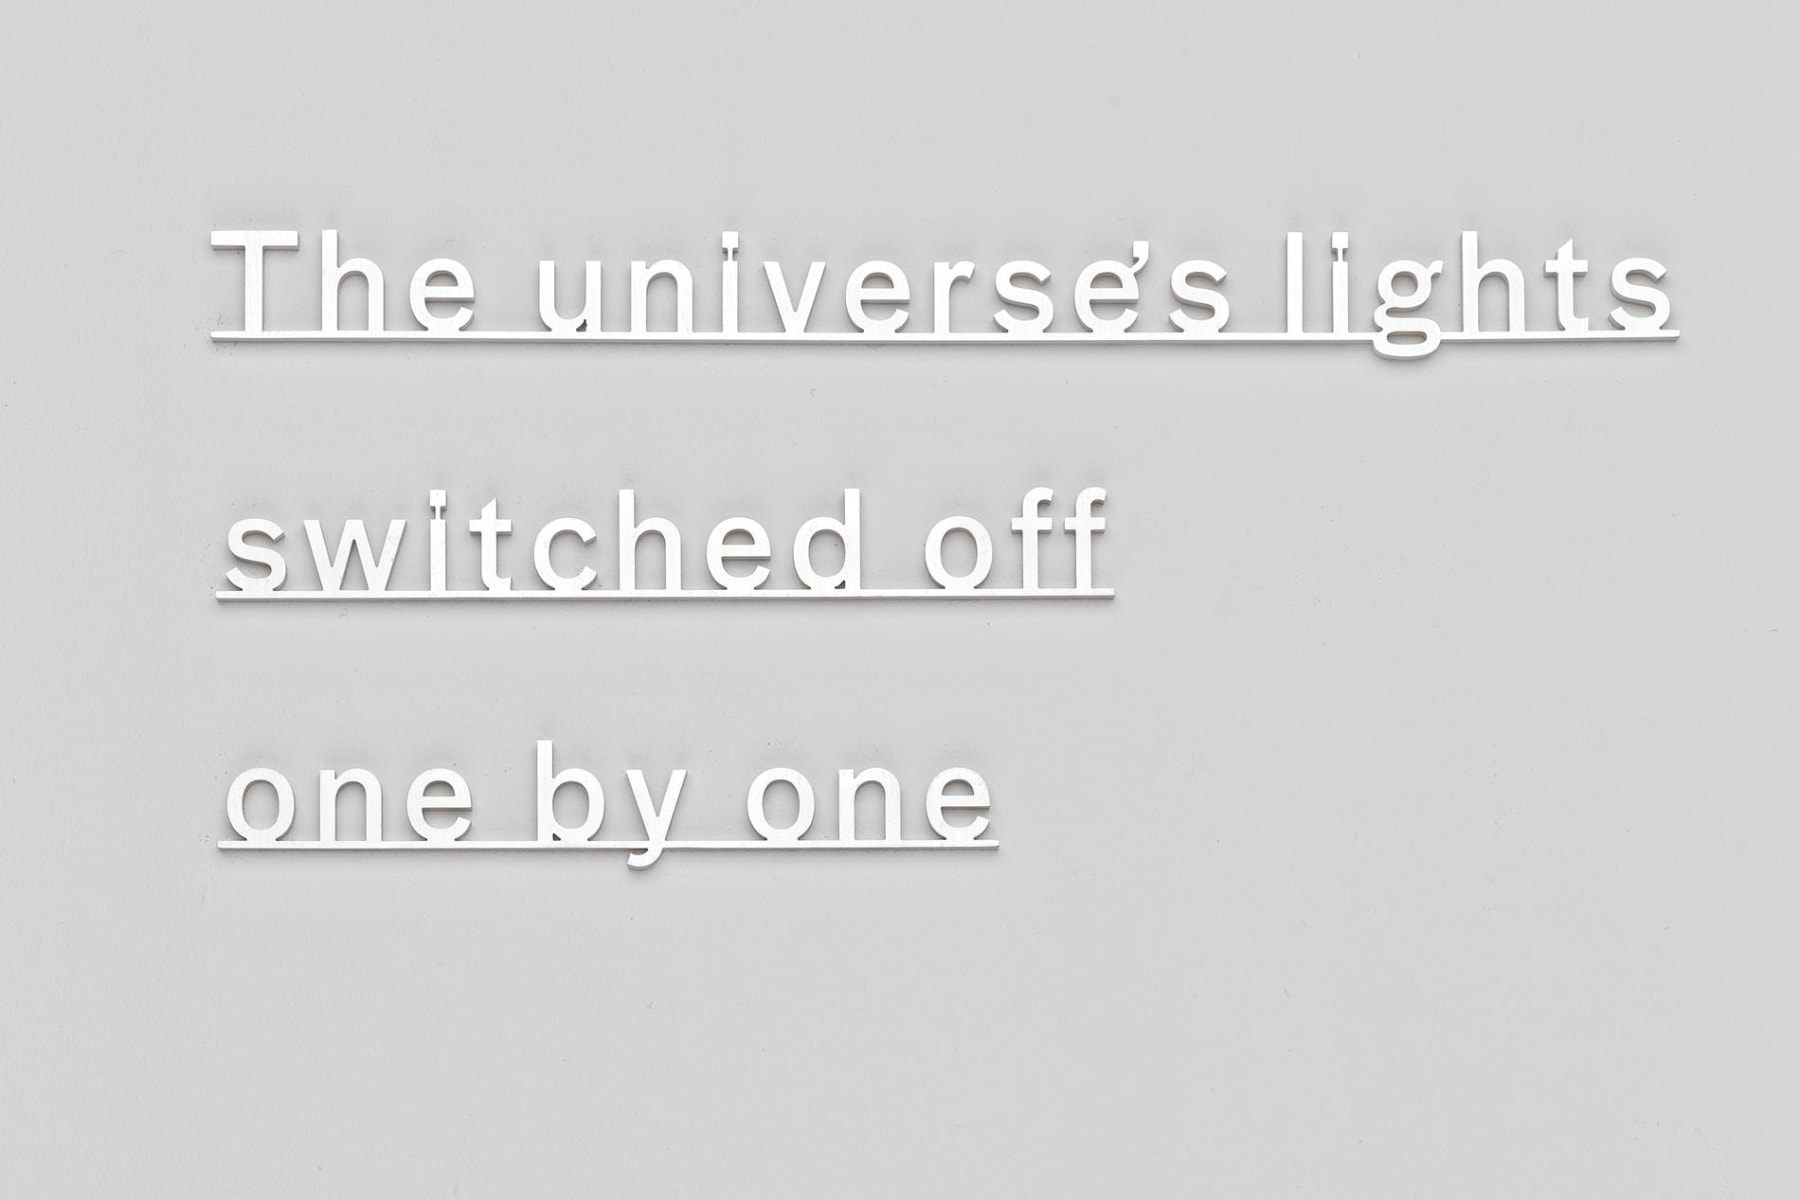 Image of KATIE PATERSON's The universe's lights switched off one by one, 2015